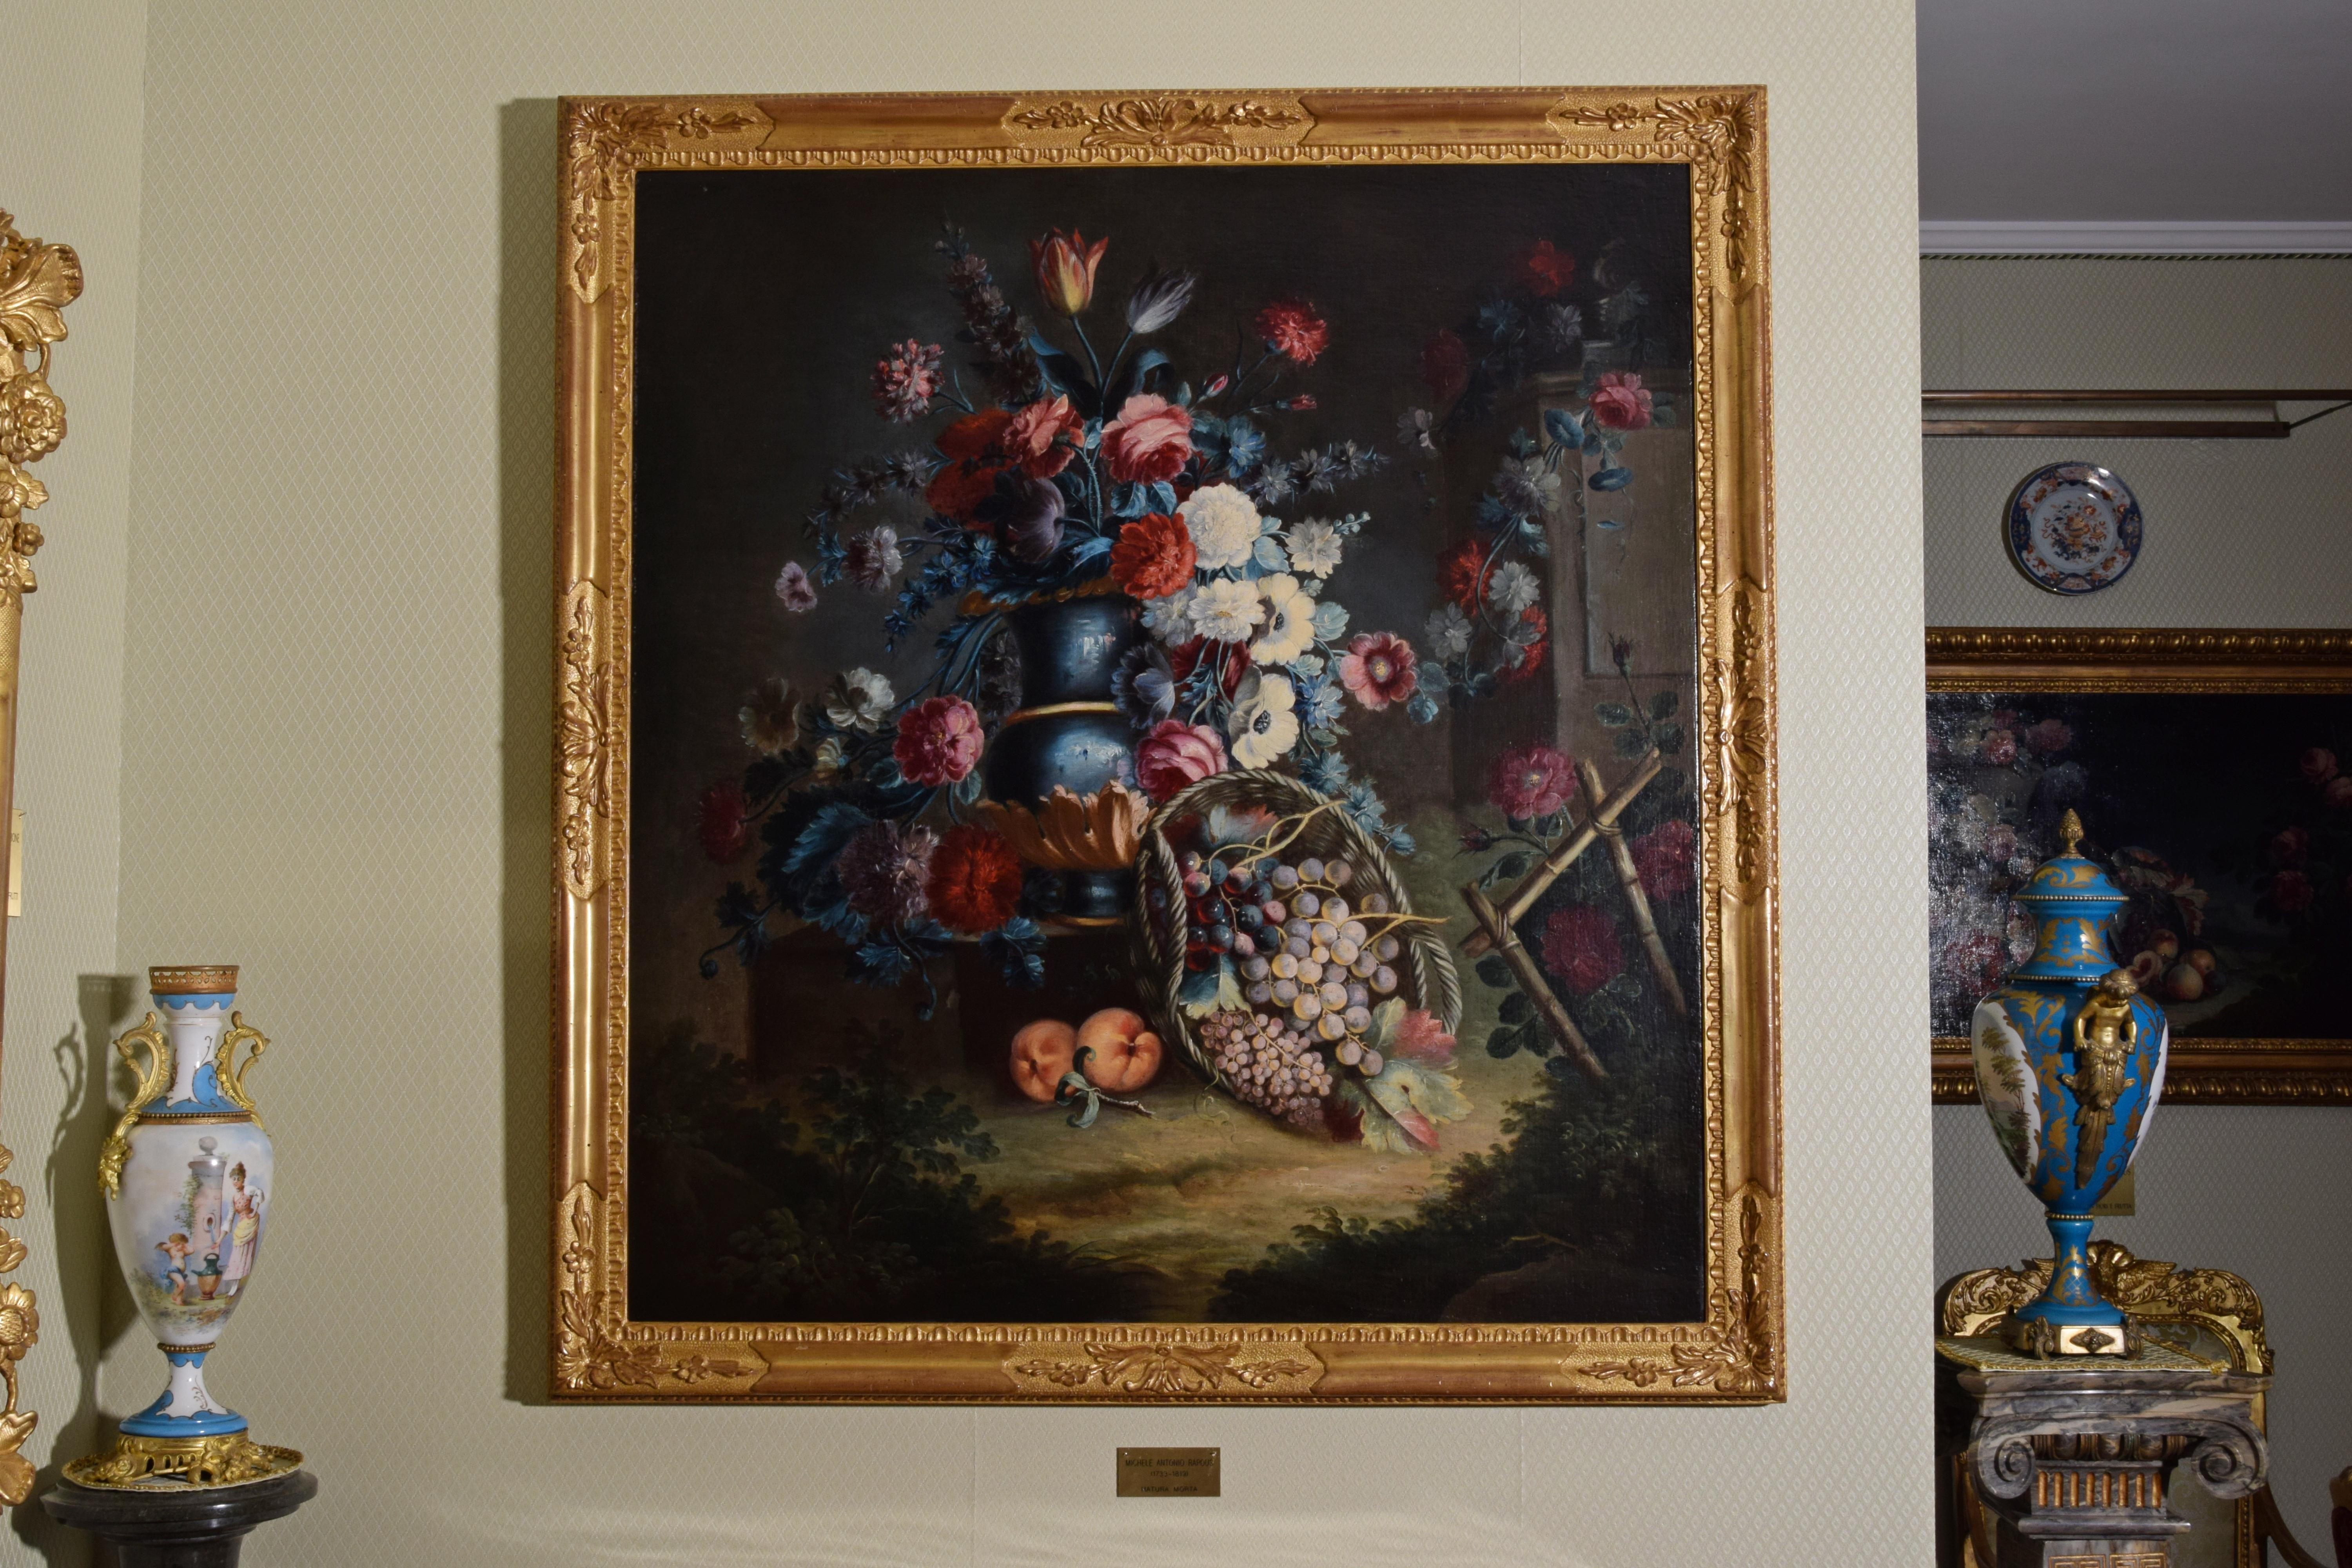 Michele Antonio Rapos (Turin 1733-1819)
Still life with vase of flowers, peaches and a basket of grapes in a garden of roses
Already collection Giuseppe Rossi
Oil on canvas. Canvas: cm 113,00 x 105,00 – with frame cm H 130,00 x W 121,00 x D